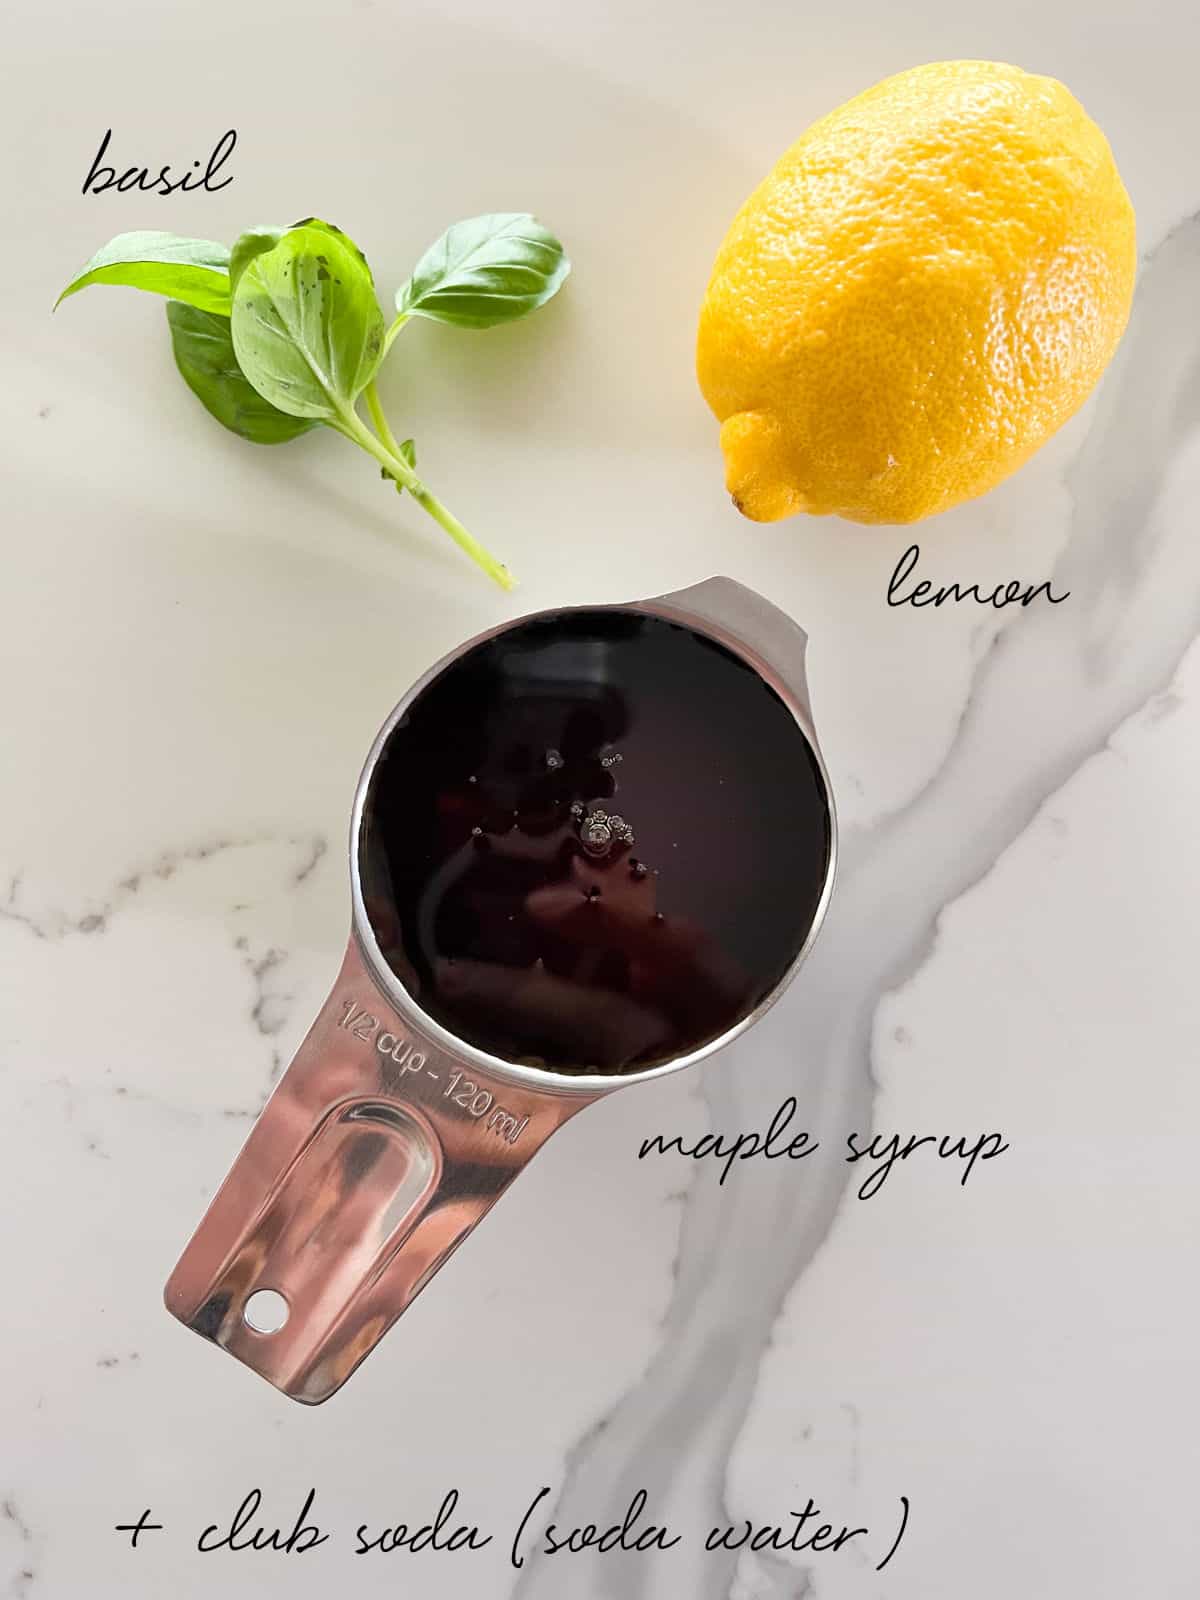 a lemon, basil leaves and a measuring cup of maple syrup